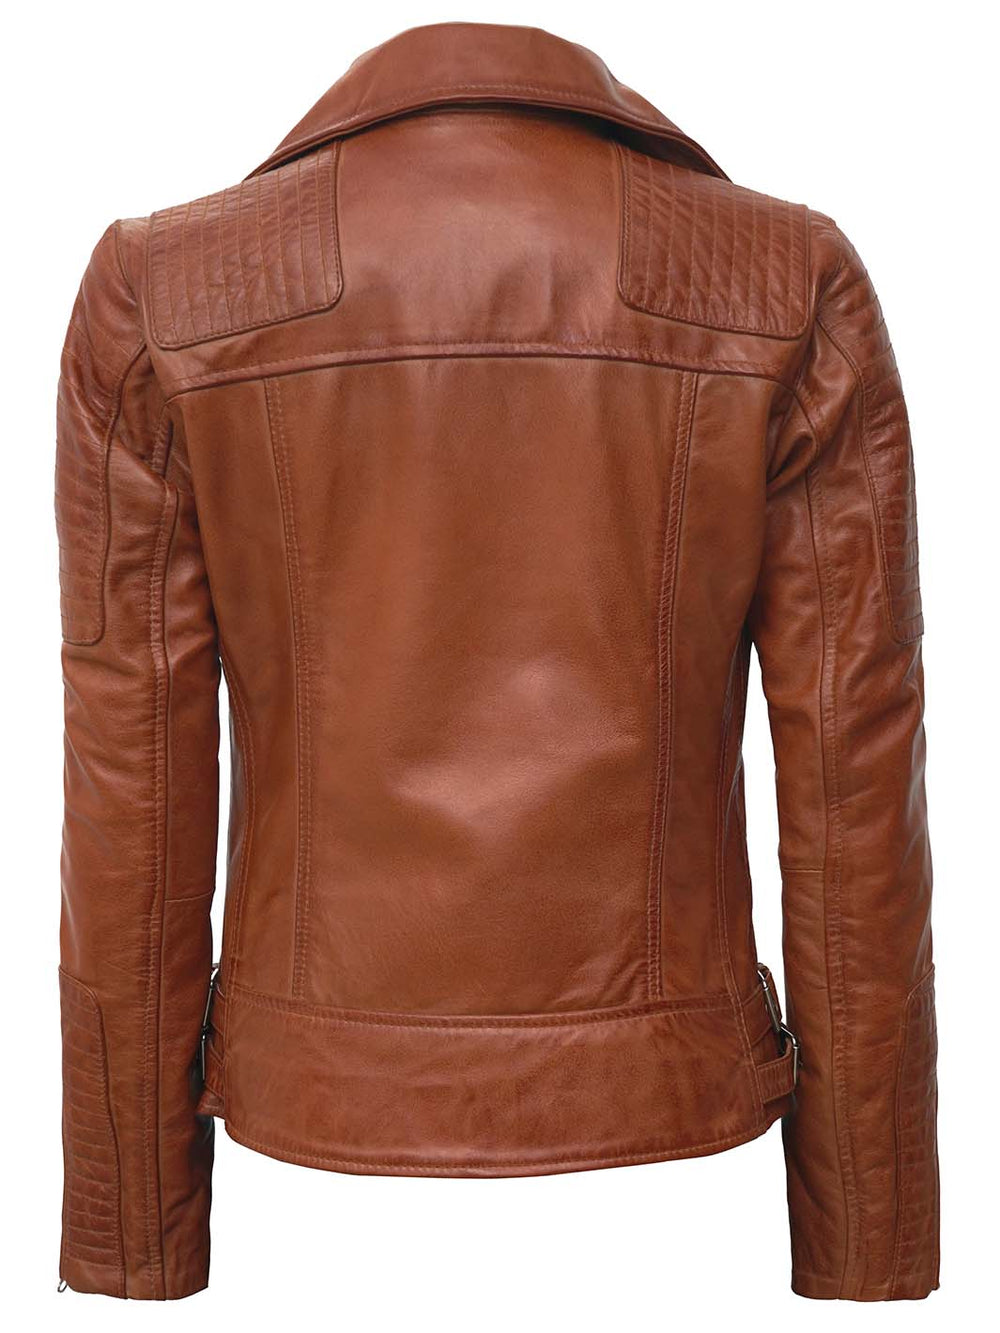 Bari Quilted Tan Leather Jacket For Women